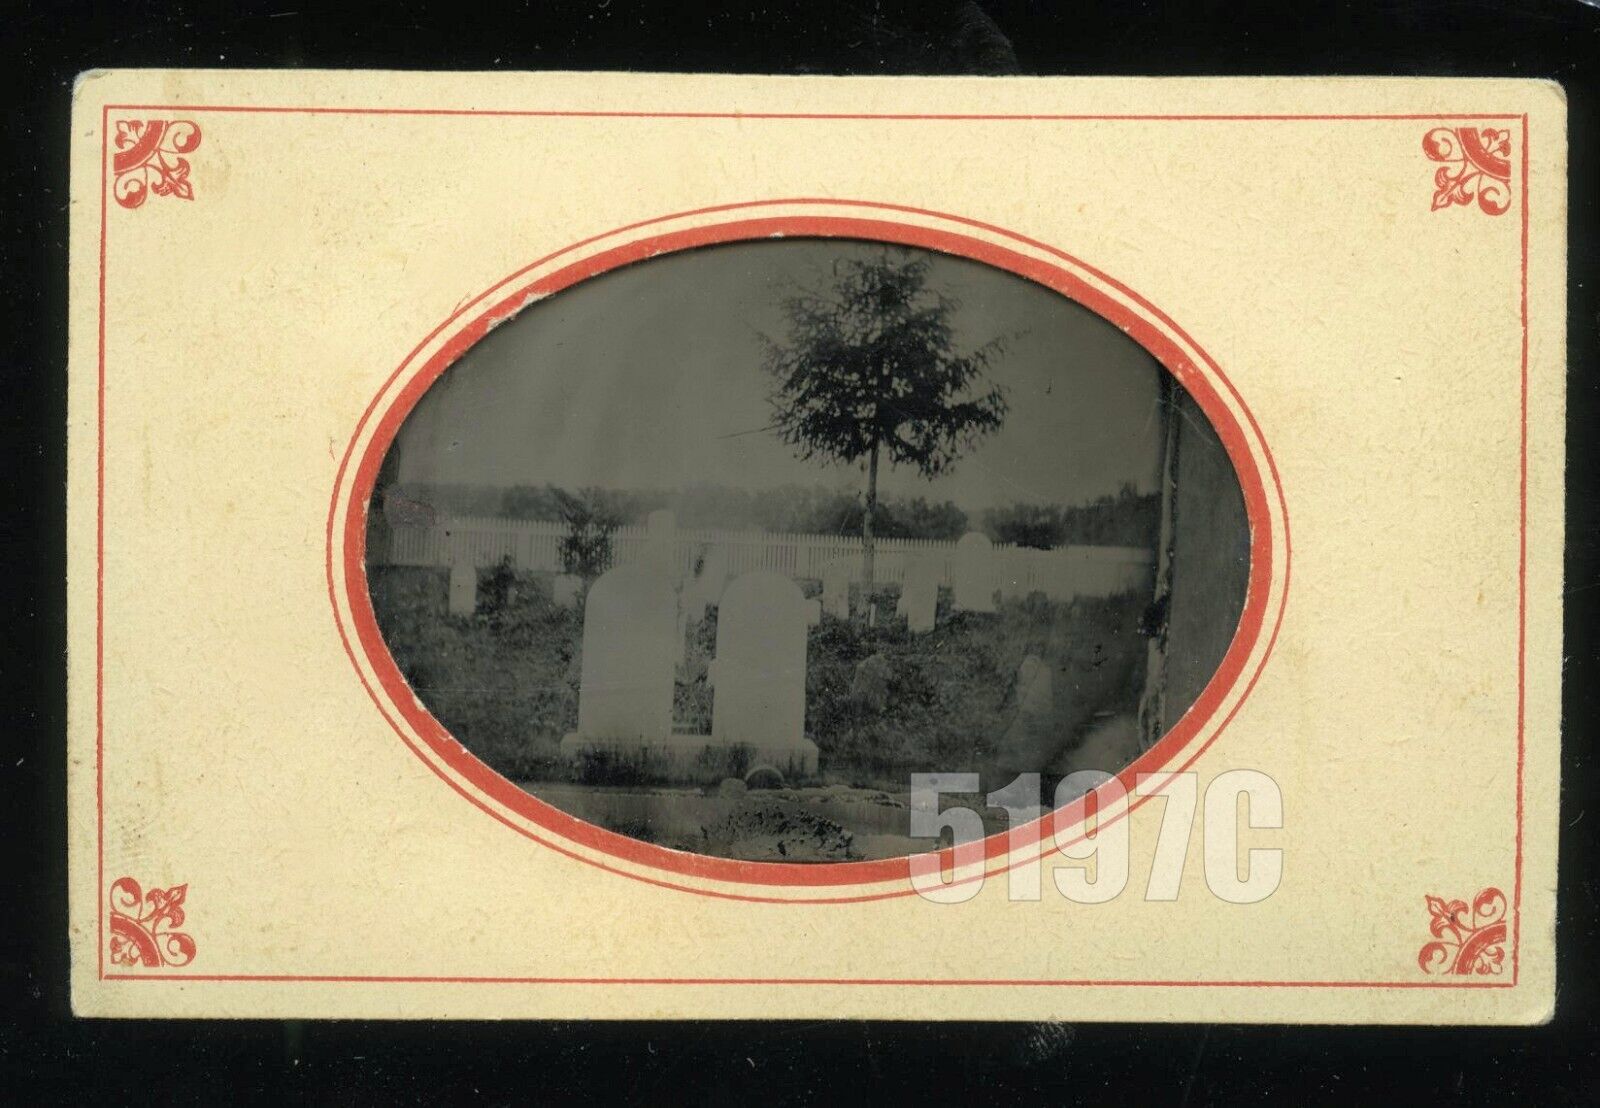 Rare 1870s Tintype of a Cemetery or Graveyard